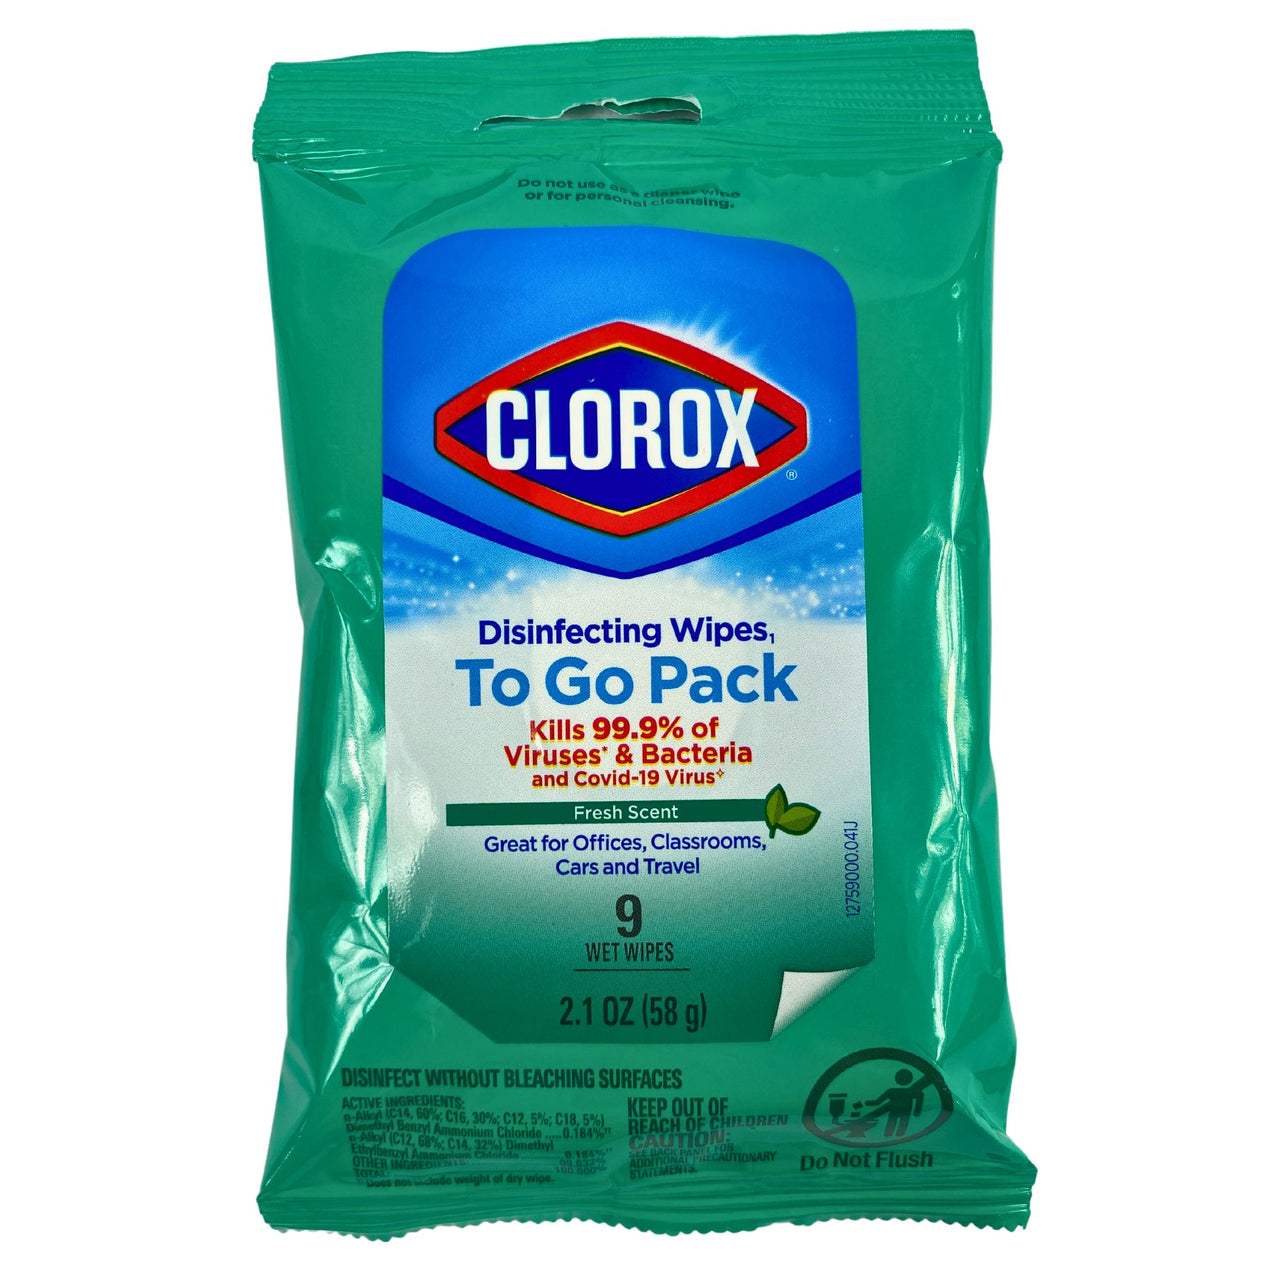 Clorox Disinfecting Wipes To Go Pack